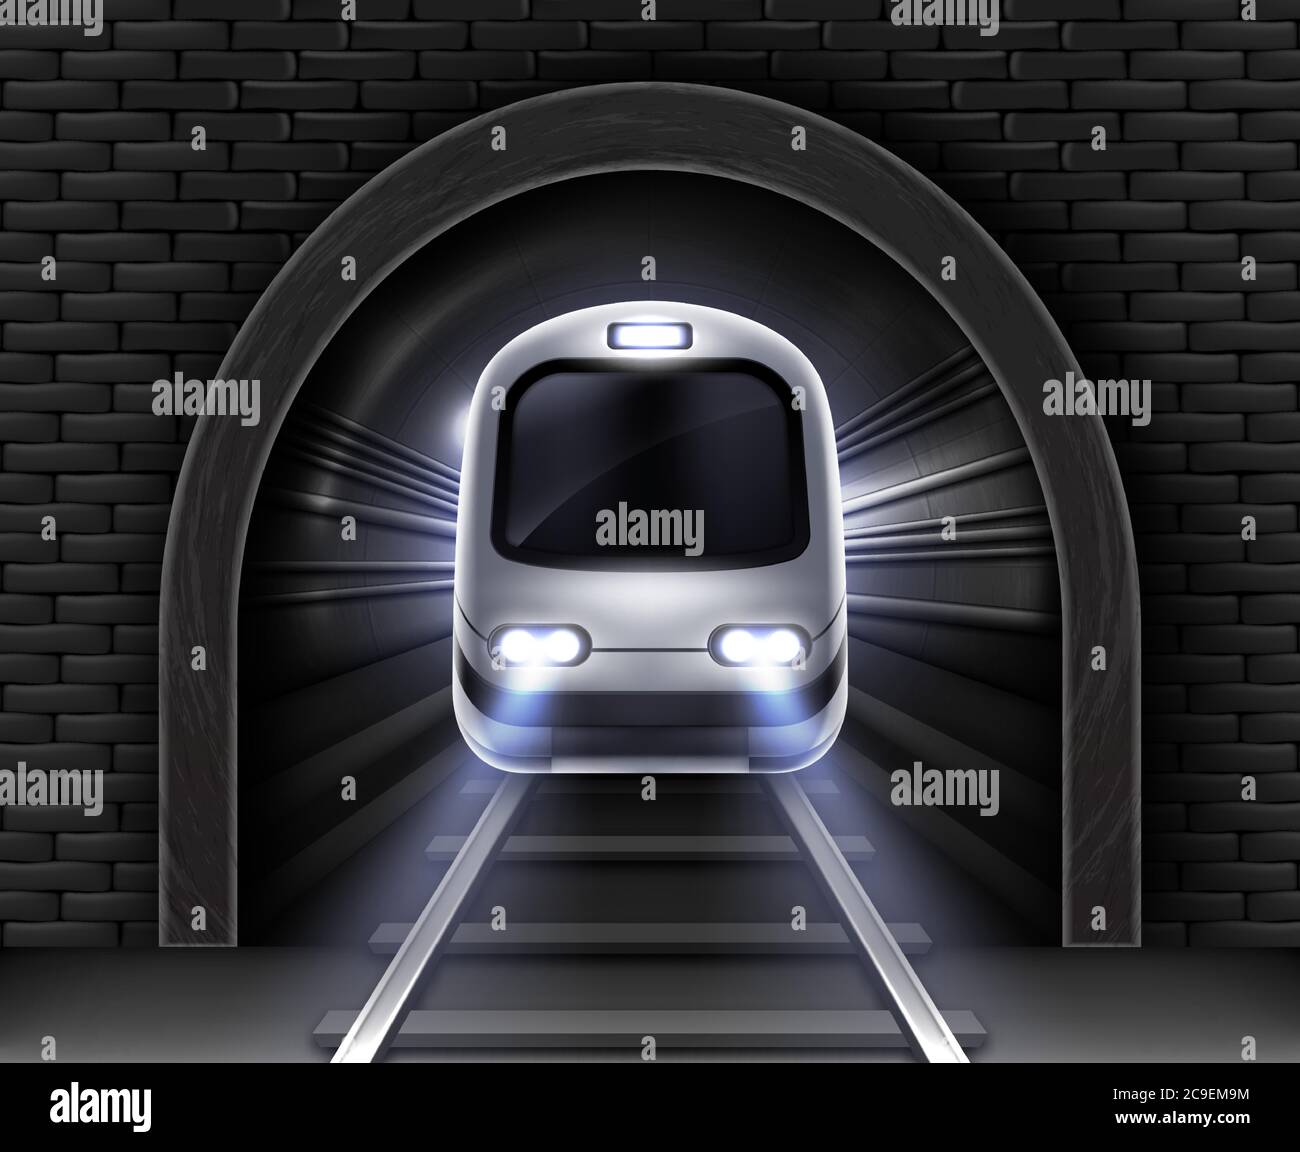 Modern subway train in tunnel. Vector realistic illustration of front wagon of passenger speed train, stone arch in brick wall and rails. Underground electric railway transport Stock Vector